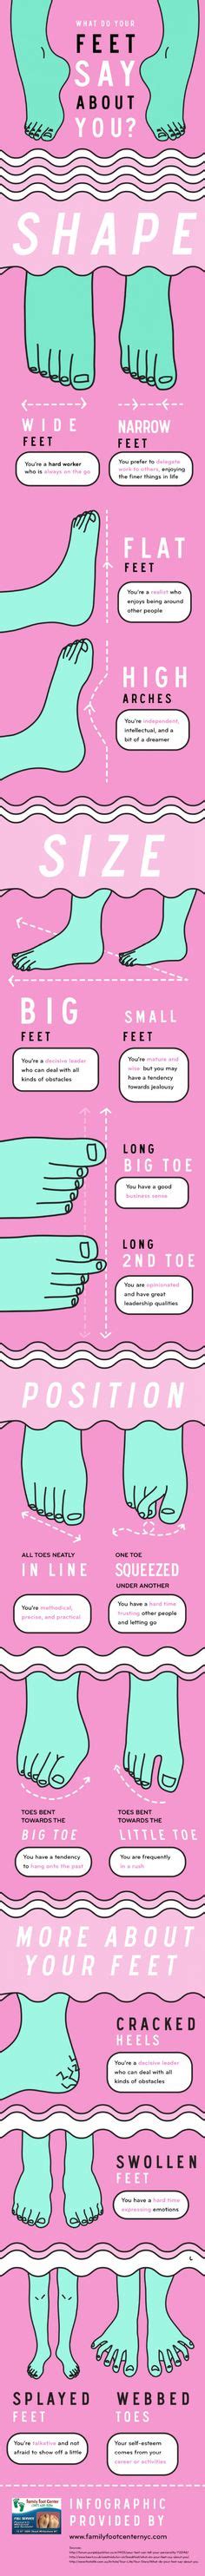 What Do Your Feet Say About You Infographic Fun Facts Information